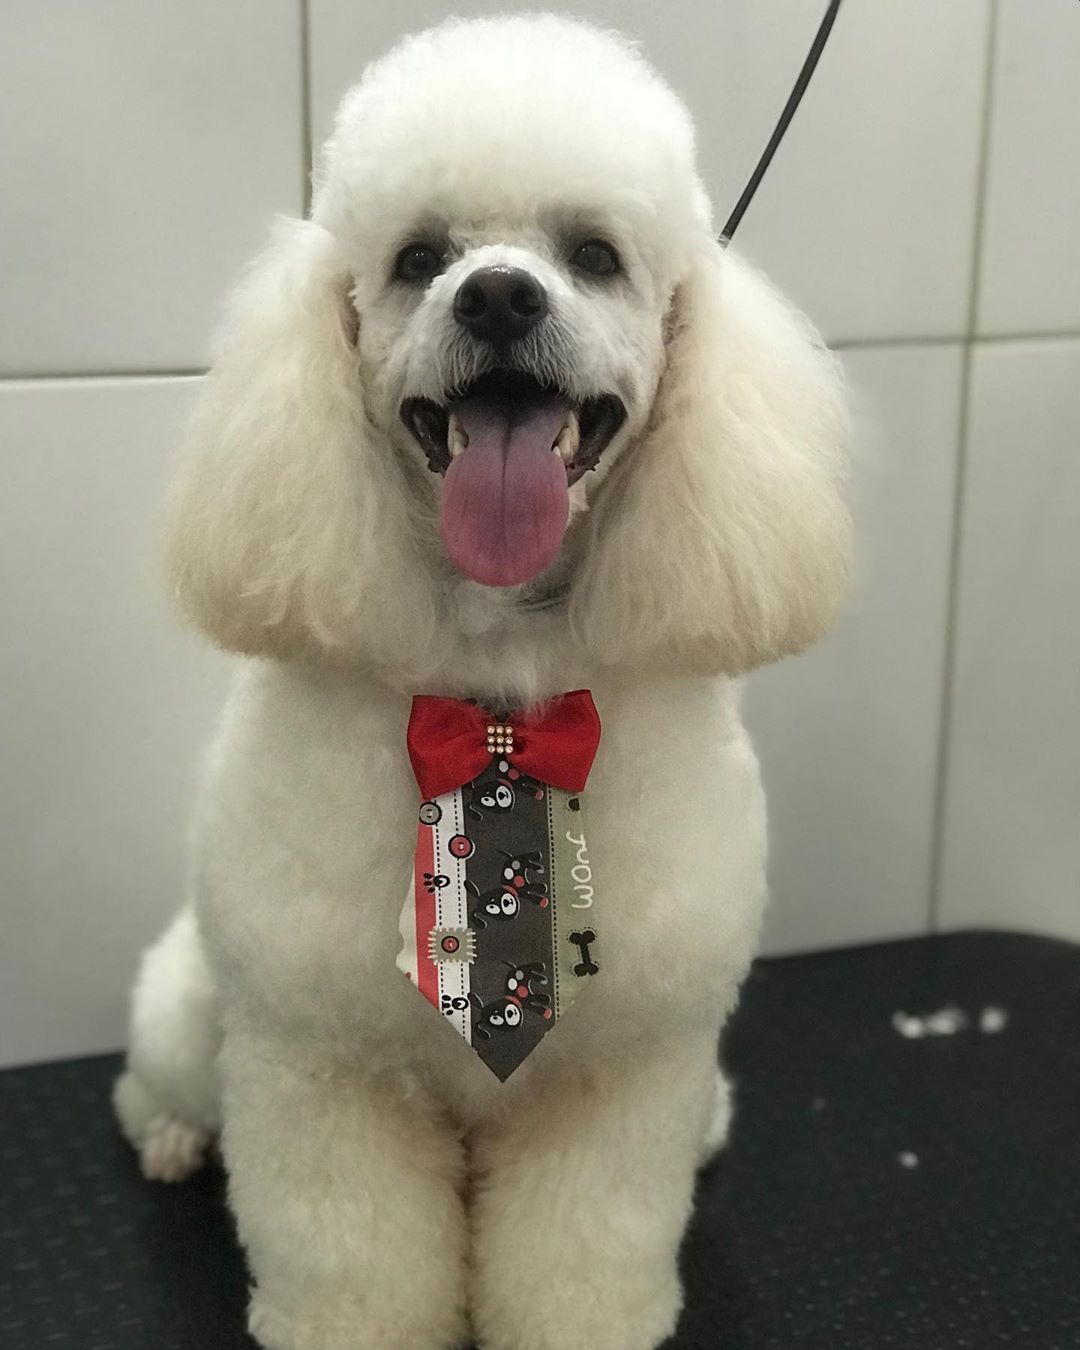 A Poodle with a new haircut and wearing a necktie while sitting on top of the grooming table and smiling with its tongue out